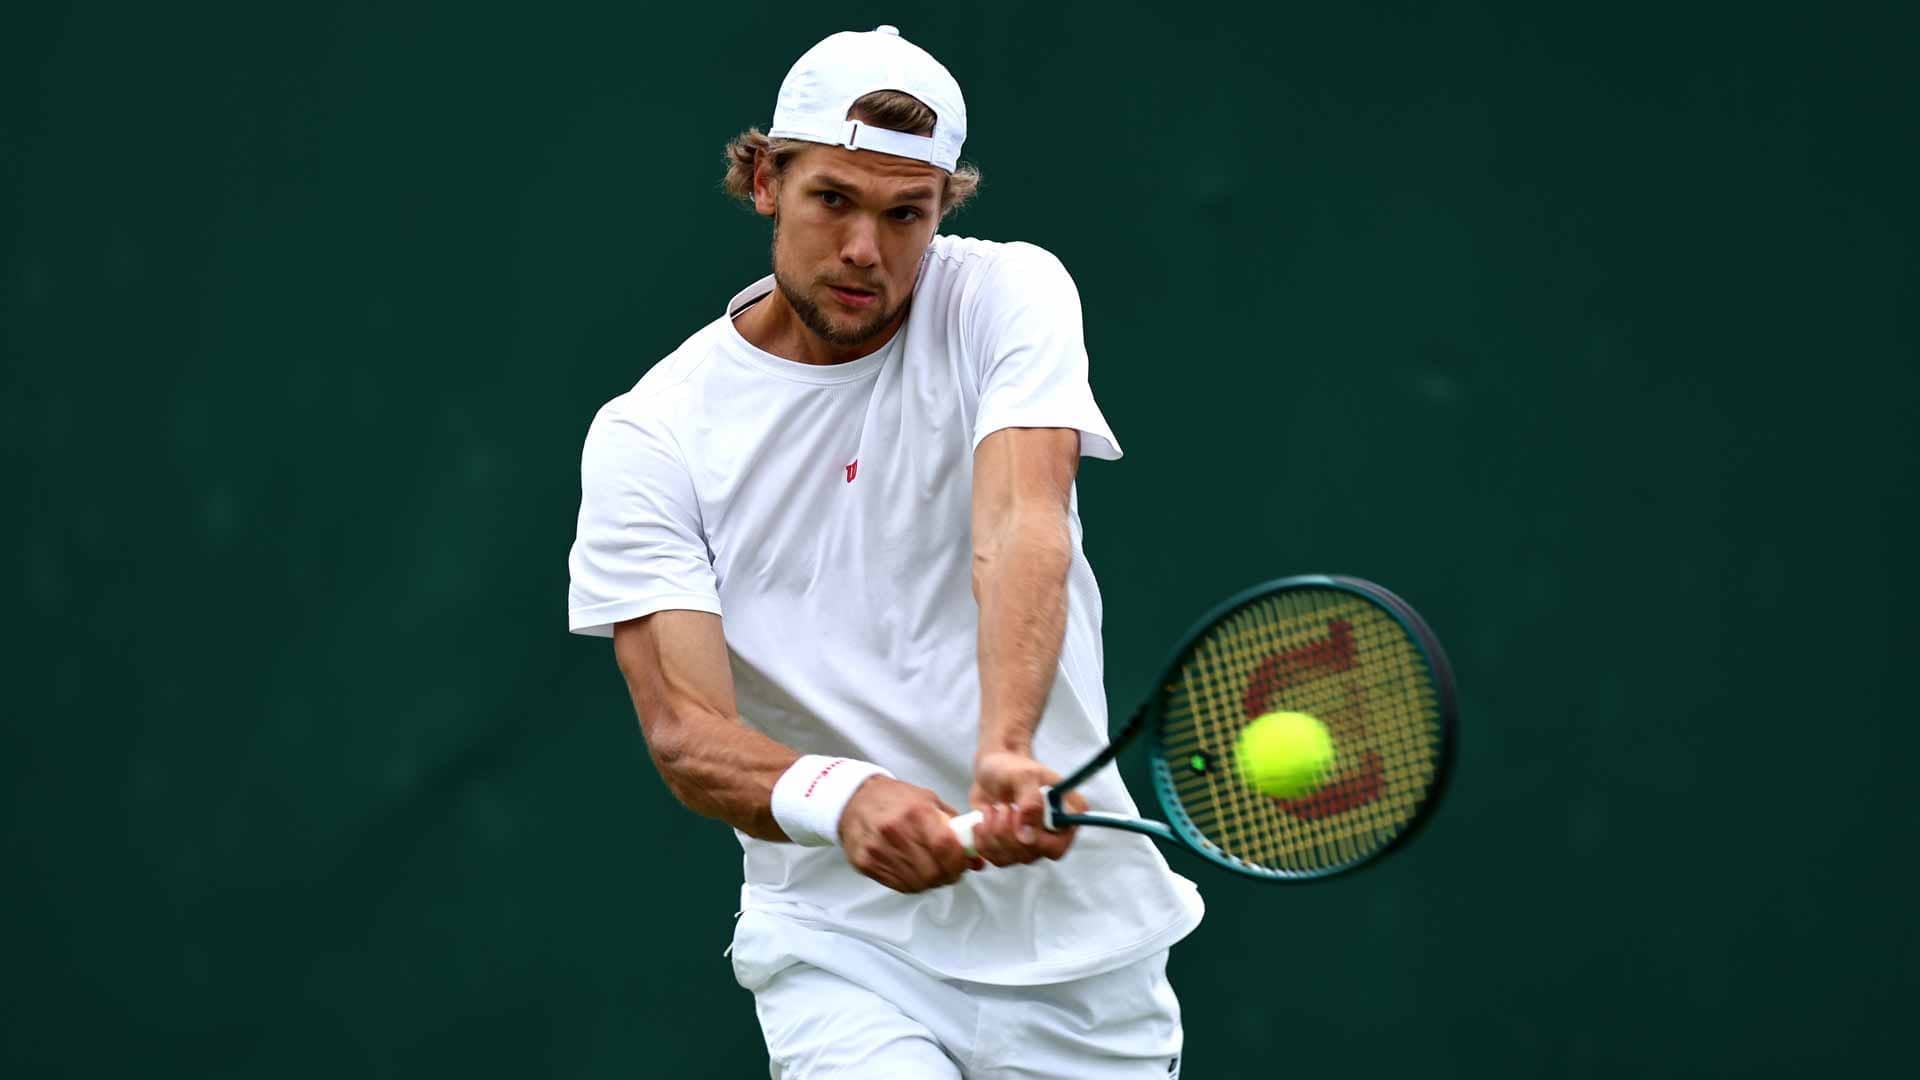 Otto Virtanen defeats Max Purcell at Wimbledon Monday to win his first main draw match at a Grand Slam tournament.